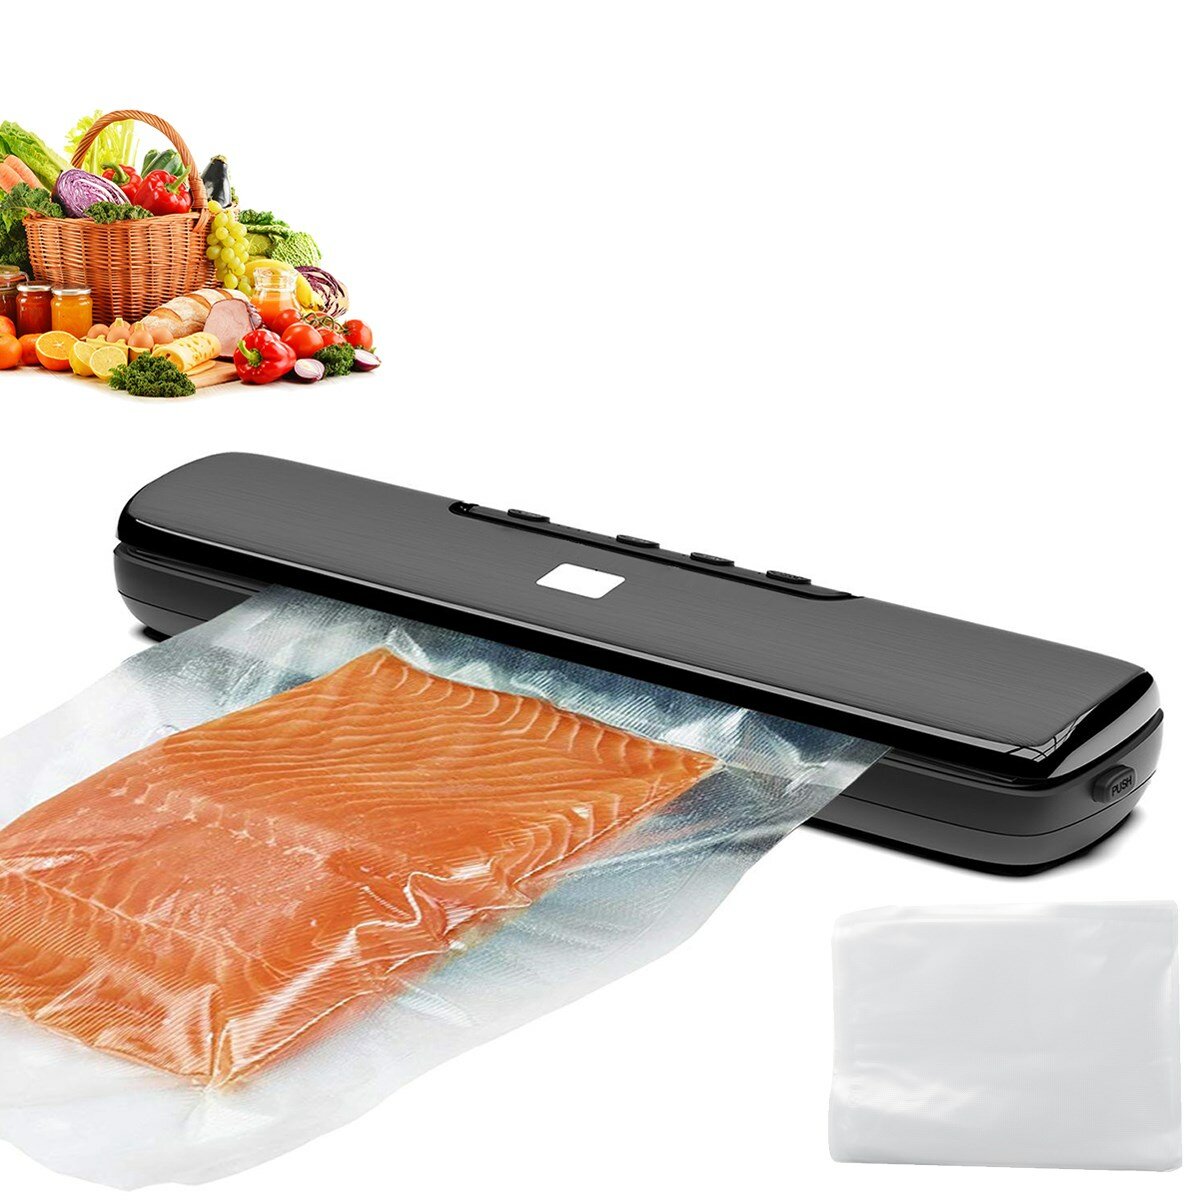 

220V New Vacuum Packing Machine Commercial Household Food Vacuum Sealer Film Sealer Vacuum Packer Include 15Pcs Bags